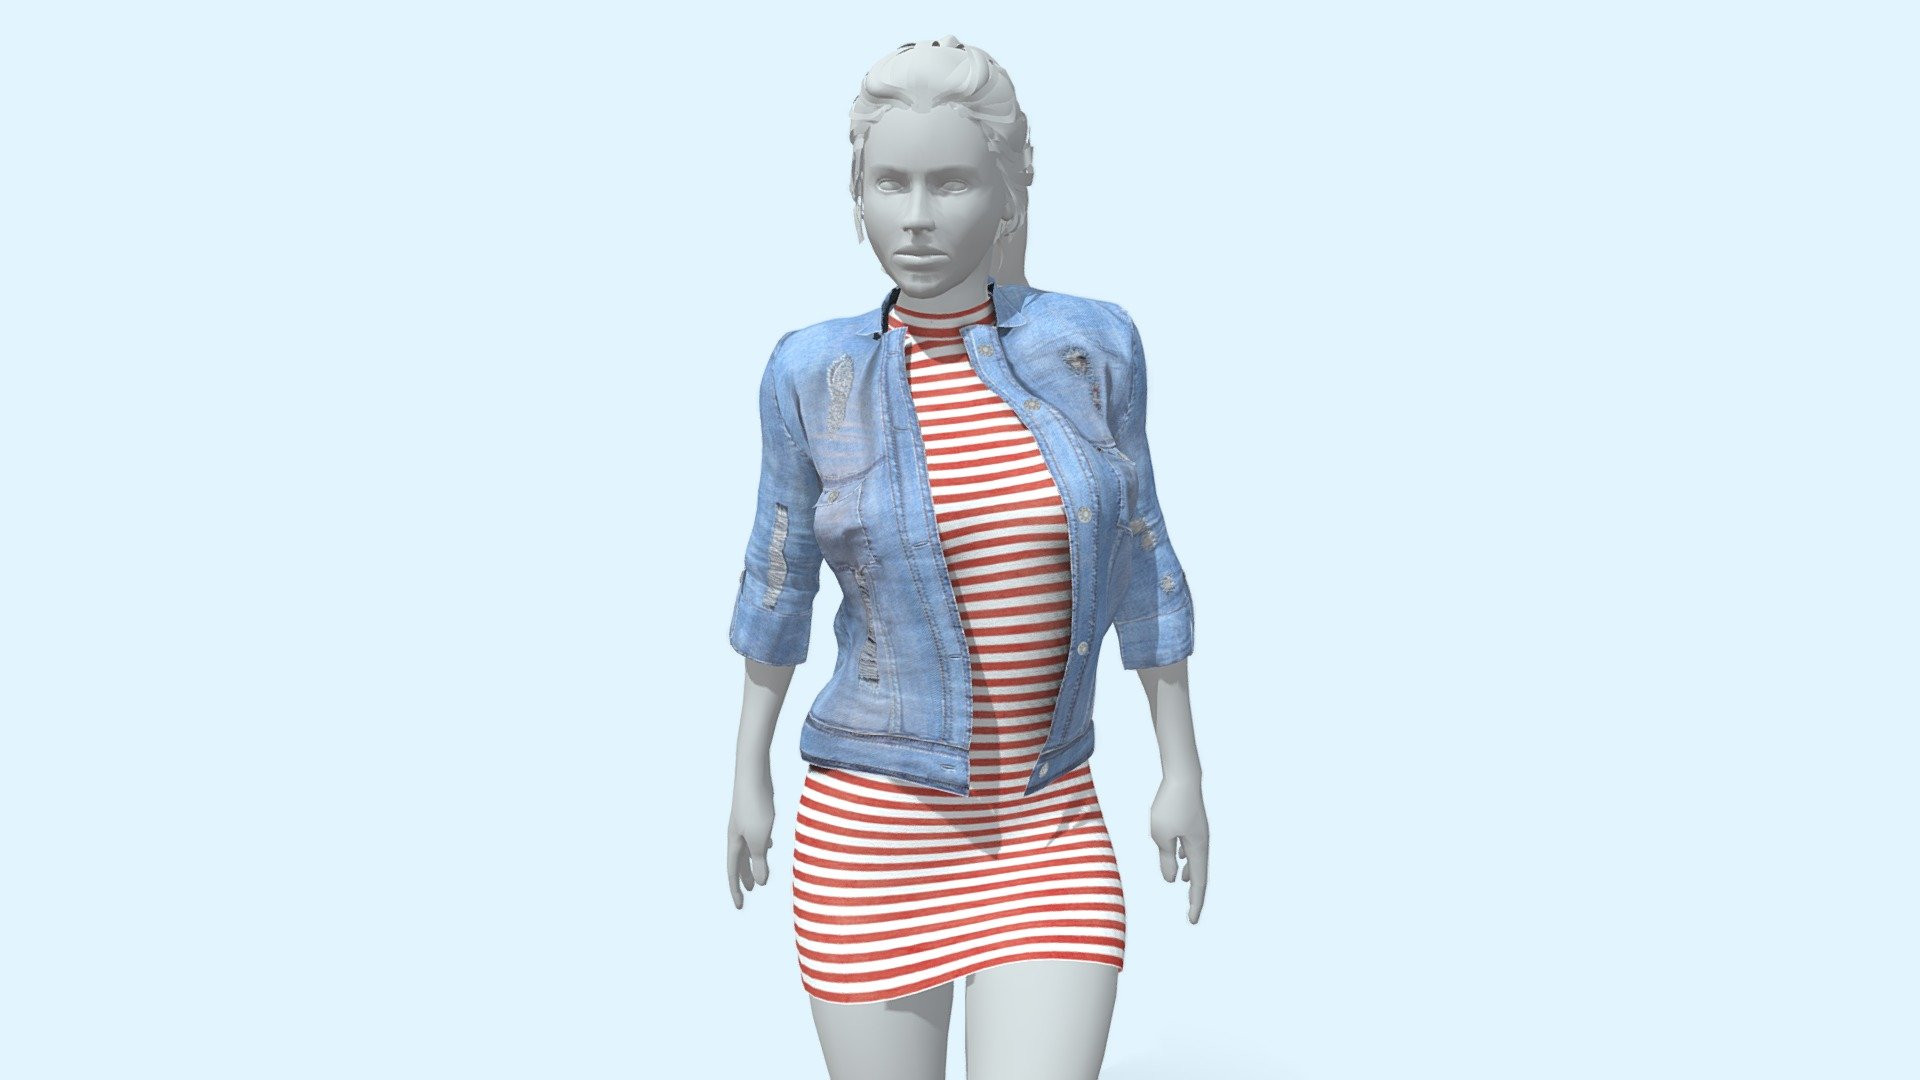 Female Clothing Low Poly 2K Textures for Mobile Games - Female Outfit with Denim Jacket - Buy Royalty Free 3D model by Stefano Vietina (@stefanovietina) 3d model